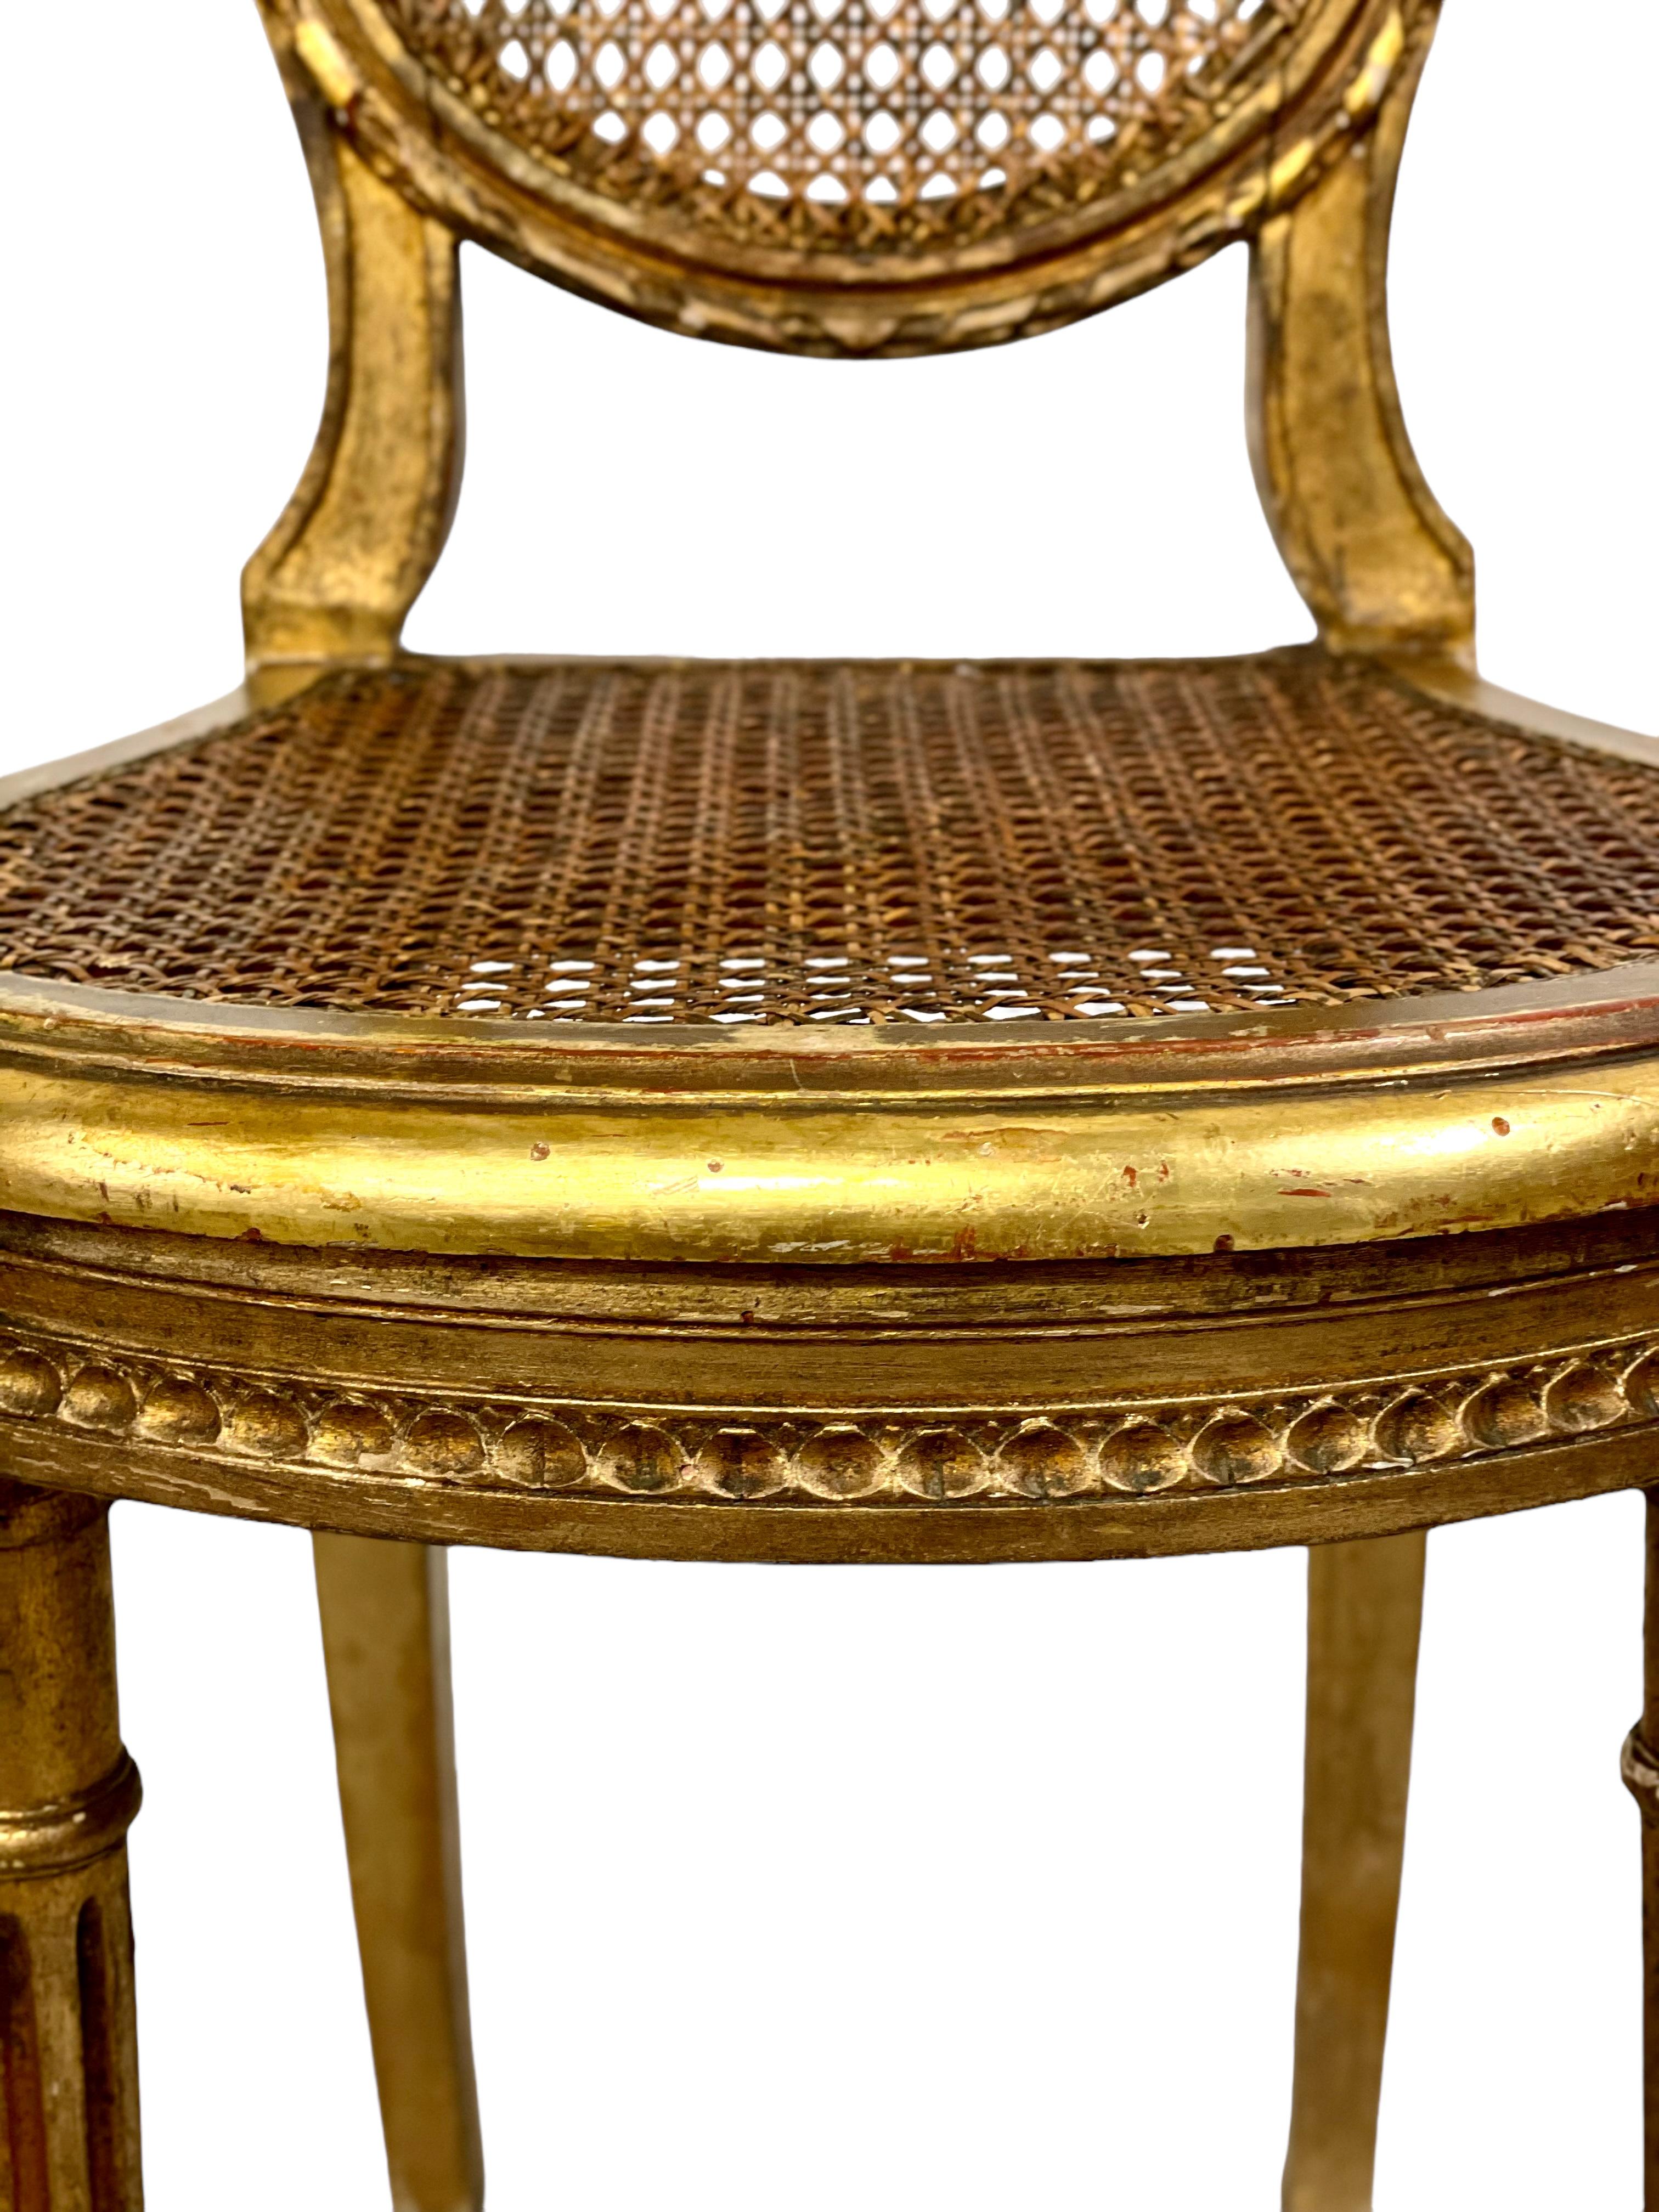 A matching pair of exquisitely gilded 19th century Louis XVI-style side chairs, with lightweight, caned oval backs and shaped and comfortable caned seats. The front legs are slender and carved, with fluted designs along their length and topped with